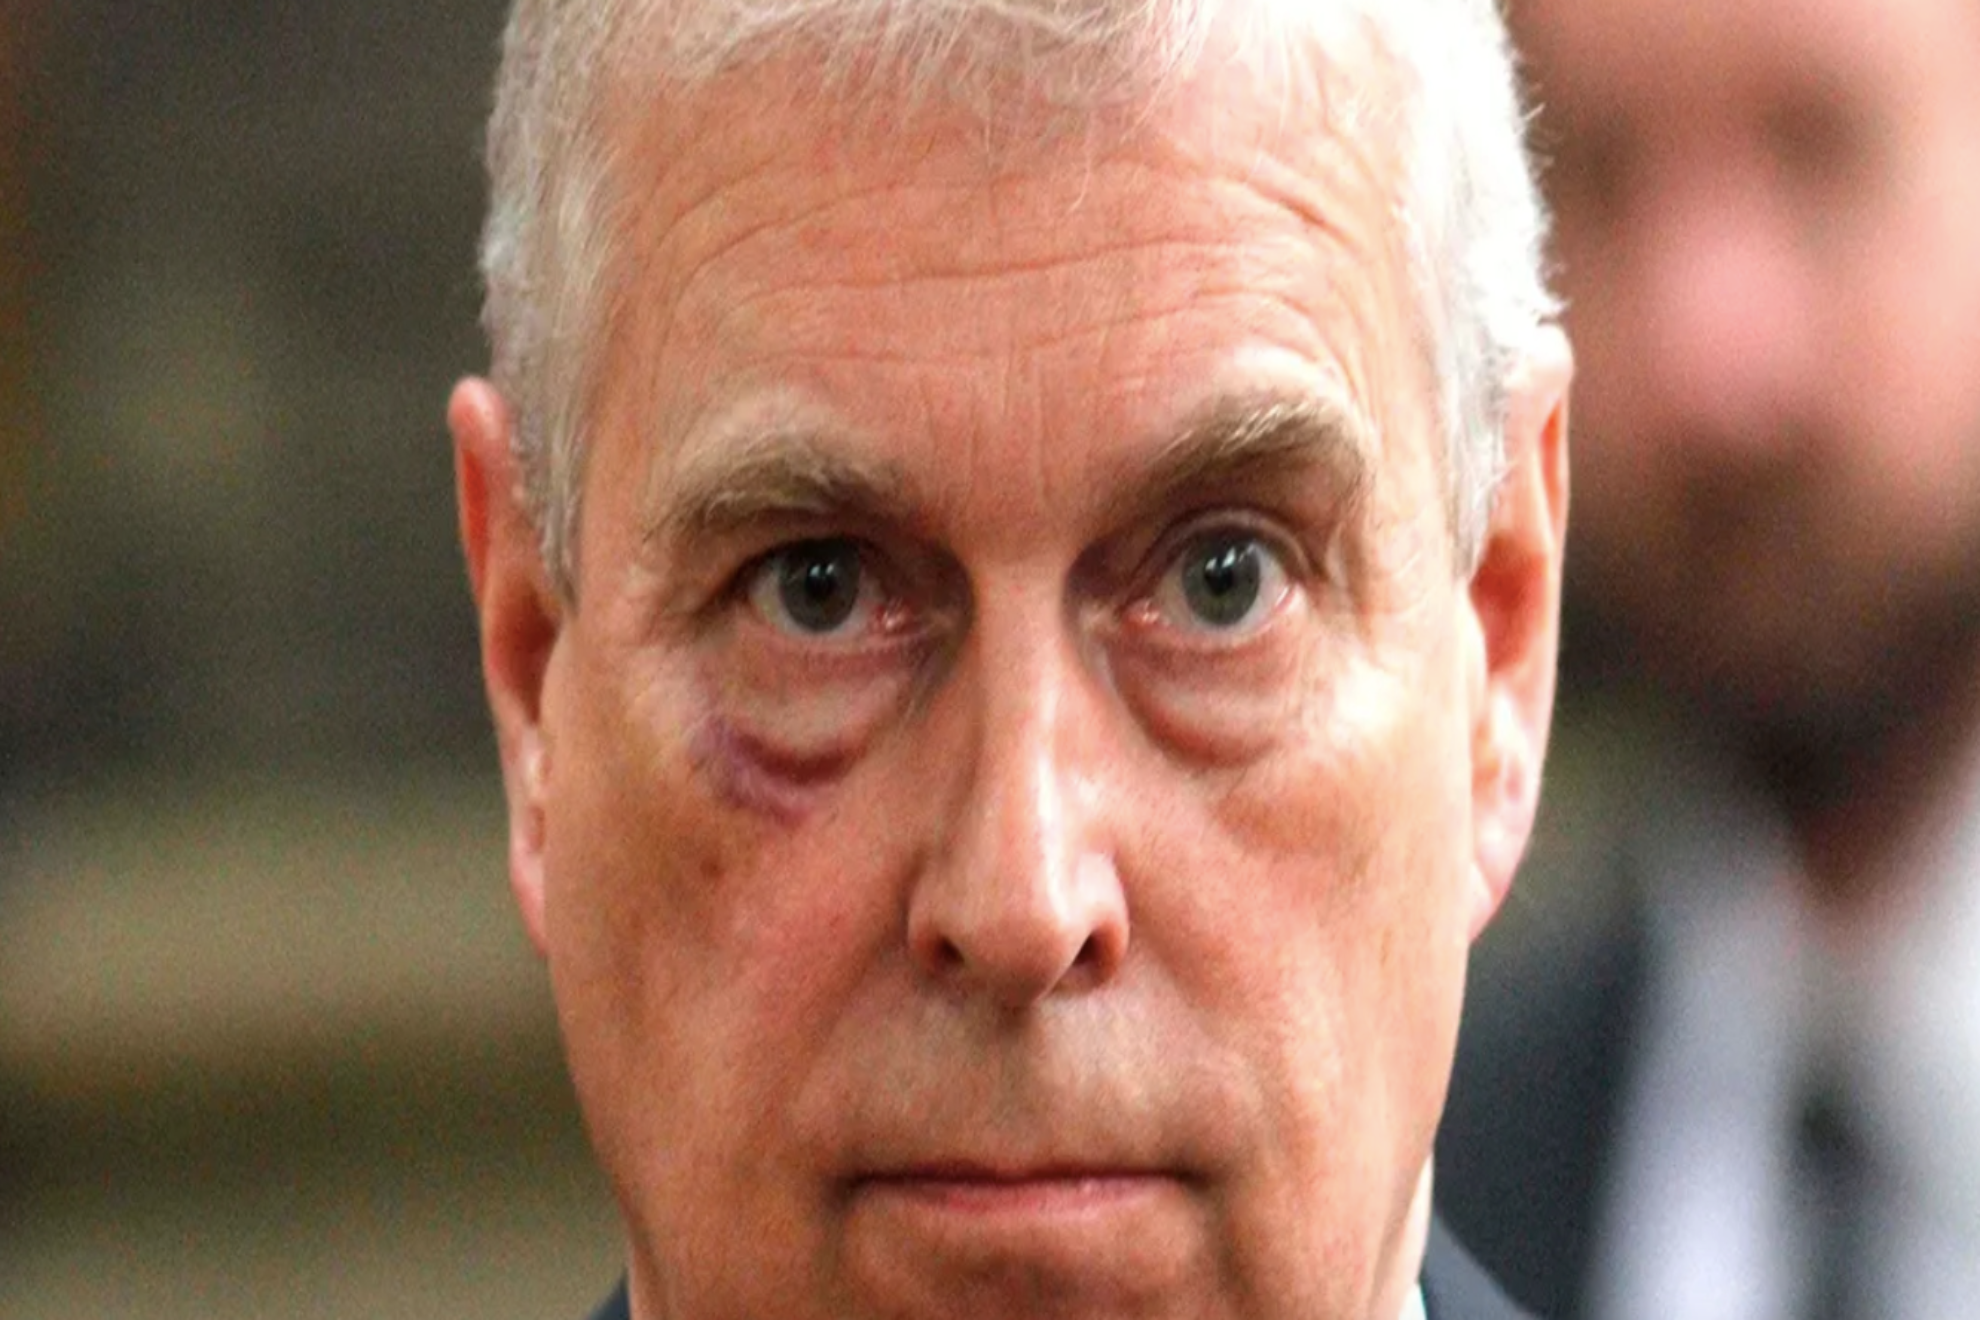 Why will Sarah Ferguson never leave the disgraced Prince Andrew? A Royal Expert reveals all...